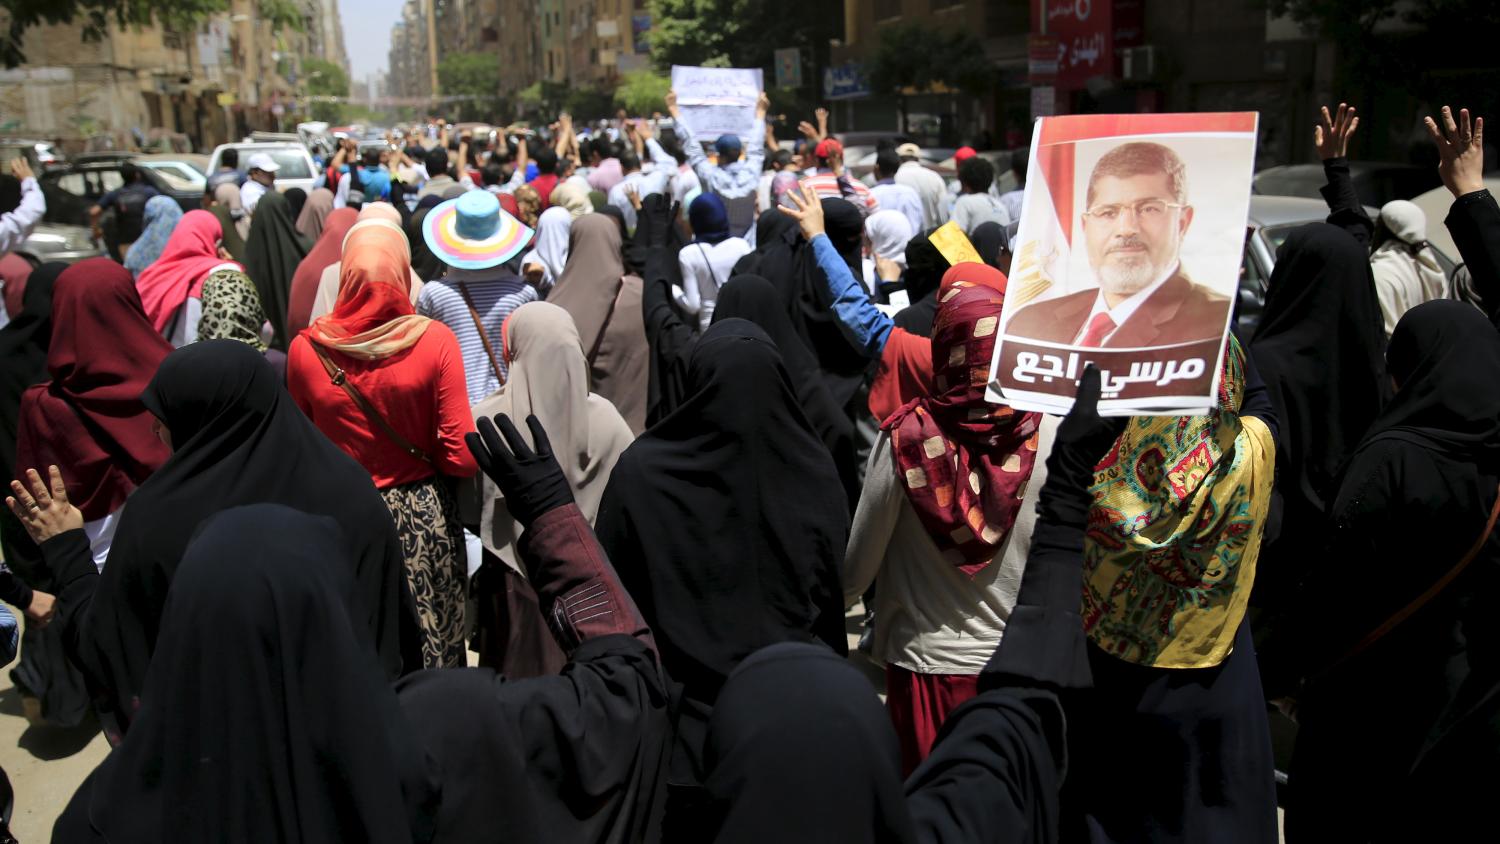 Supporters of the Muslim Brotherhood and deposed Egyptian President Mohamed Mursi shout slogans against an Egyptian court's decision to sentence Mursi and other leaders to death, at a rally in Al Haram street near Giza square, south of Cairo, Egypt June 19, 2015. Mursi will appeal against a conviction for violence, kidnapping and torture imposed by a court over the killing of protesters, his lawyers were quoted as saying by state media on Thursday. The poster of Mursi reads, "Mursi will back." REUTERS/Amr Abdallah Dalsh - RTX1H98A